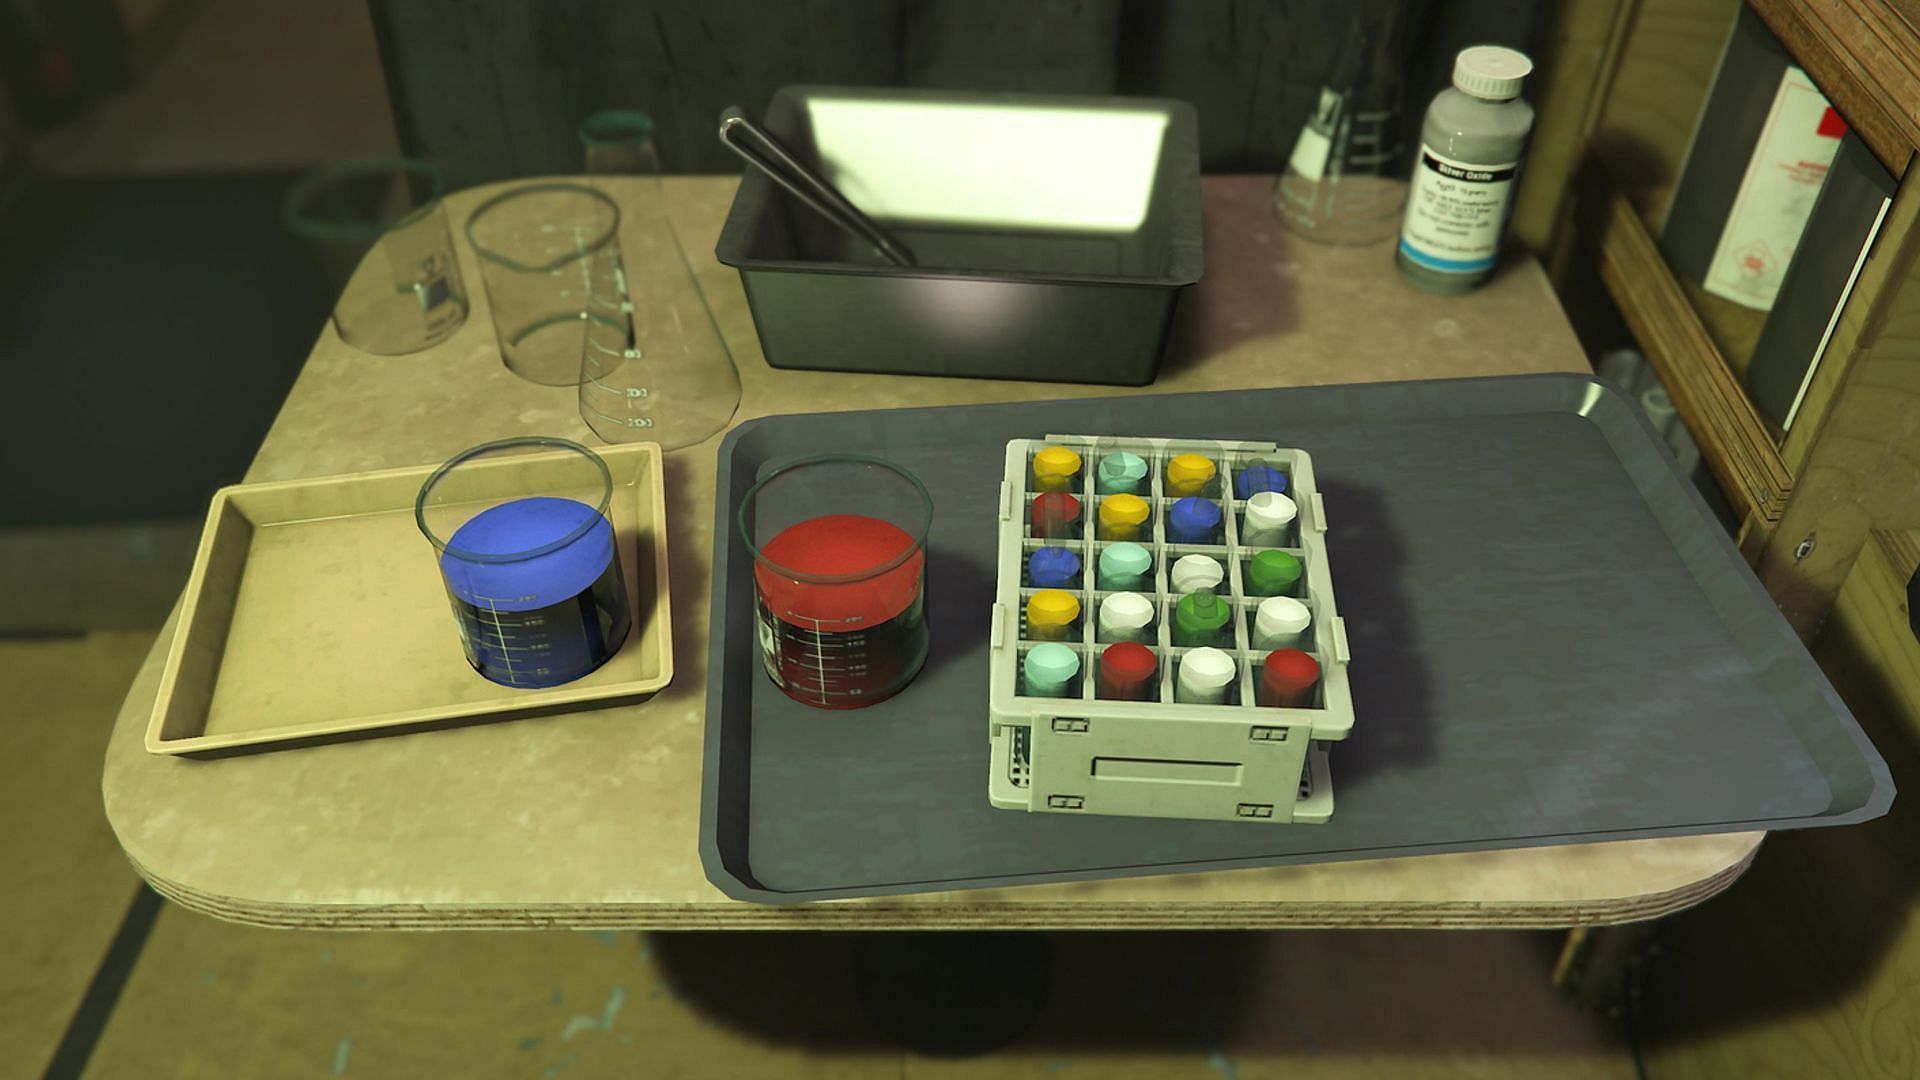 It would make sense for a game in Vice City to involve drugs (Image via Rockstar Games)